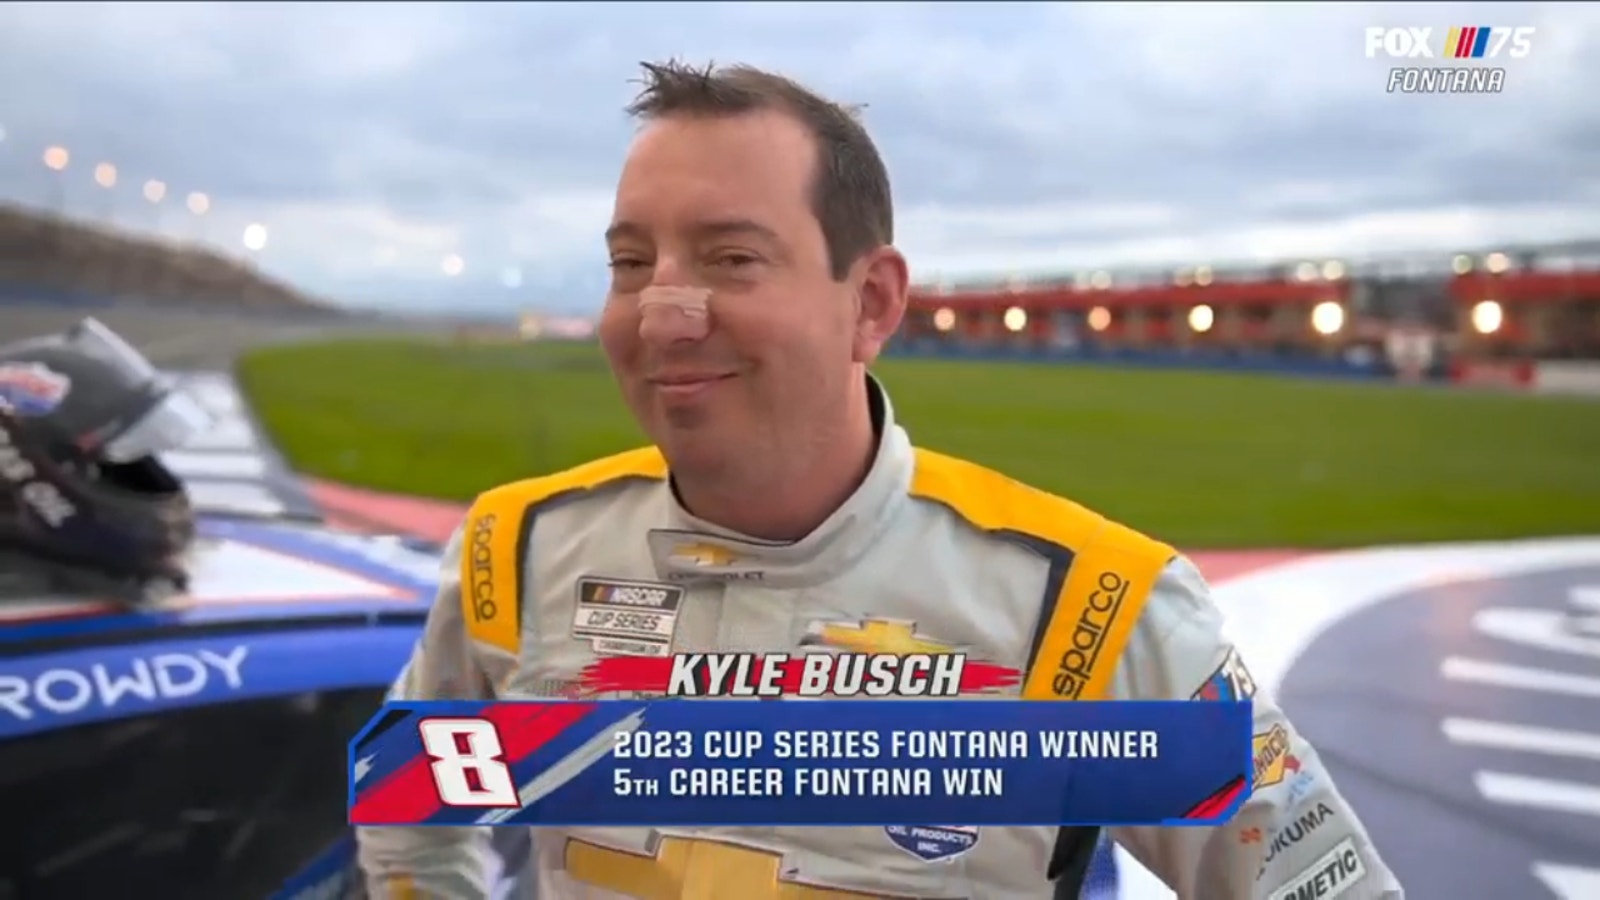 Busch takes first win at RCR